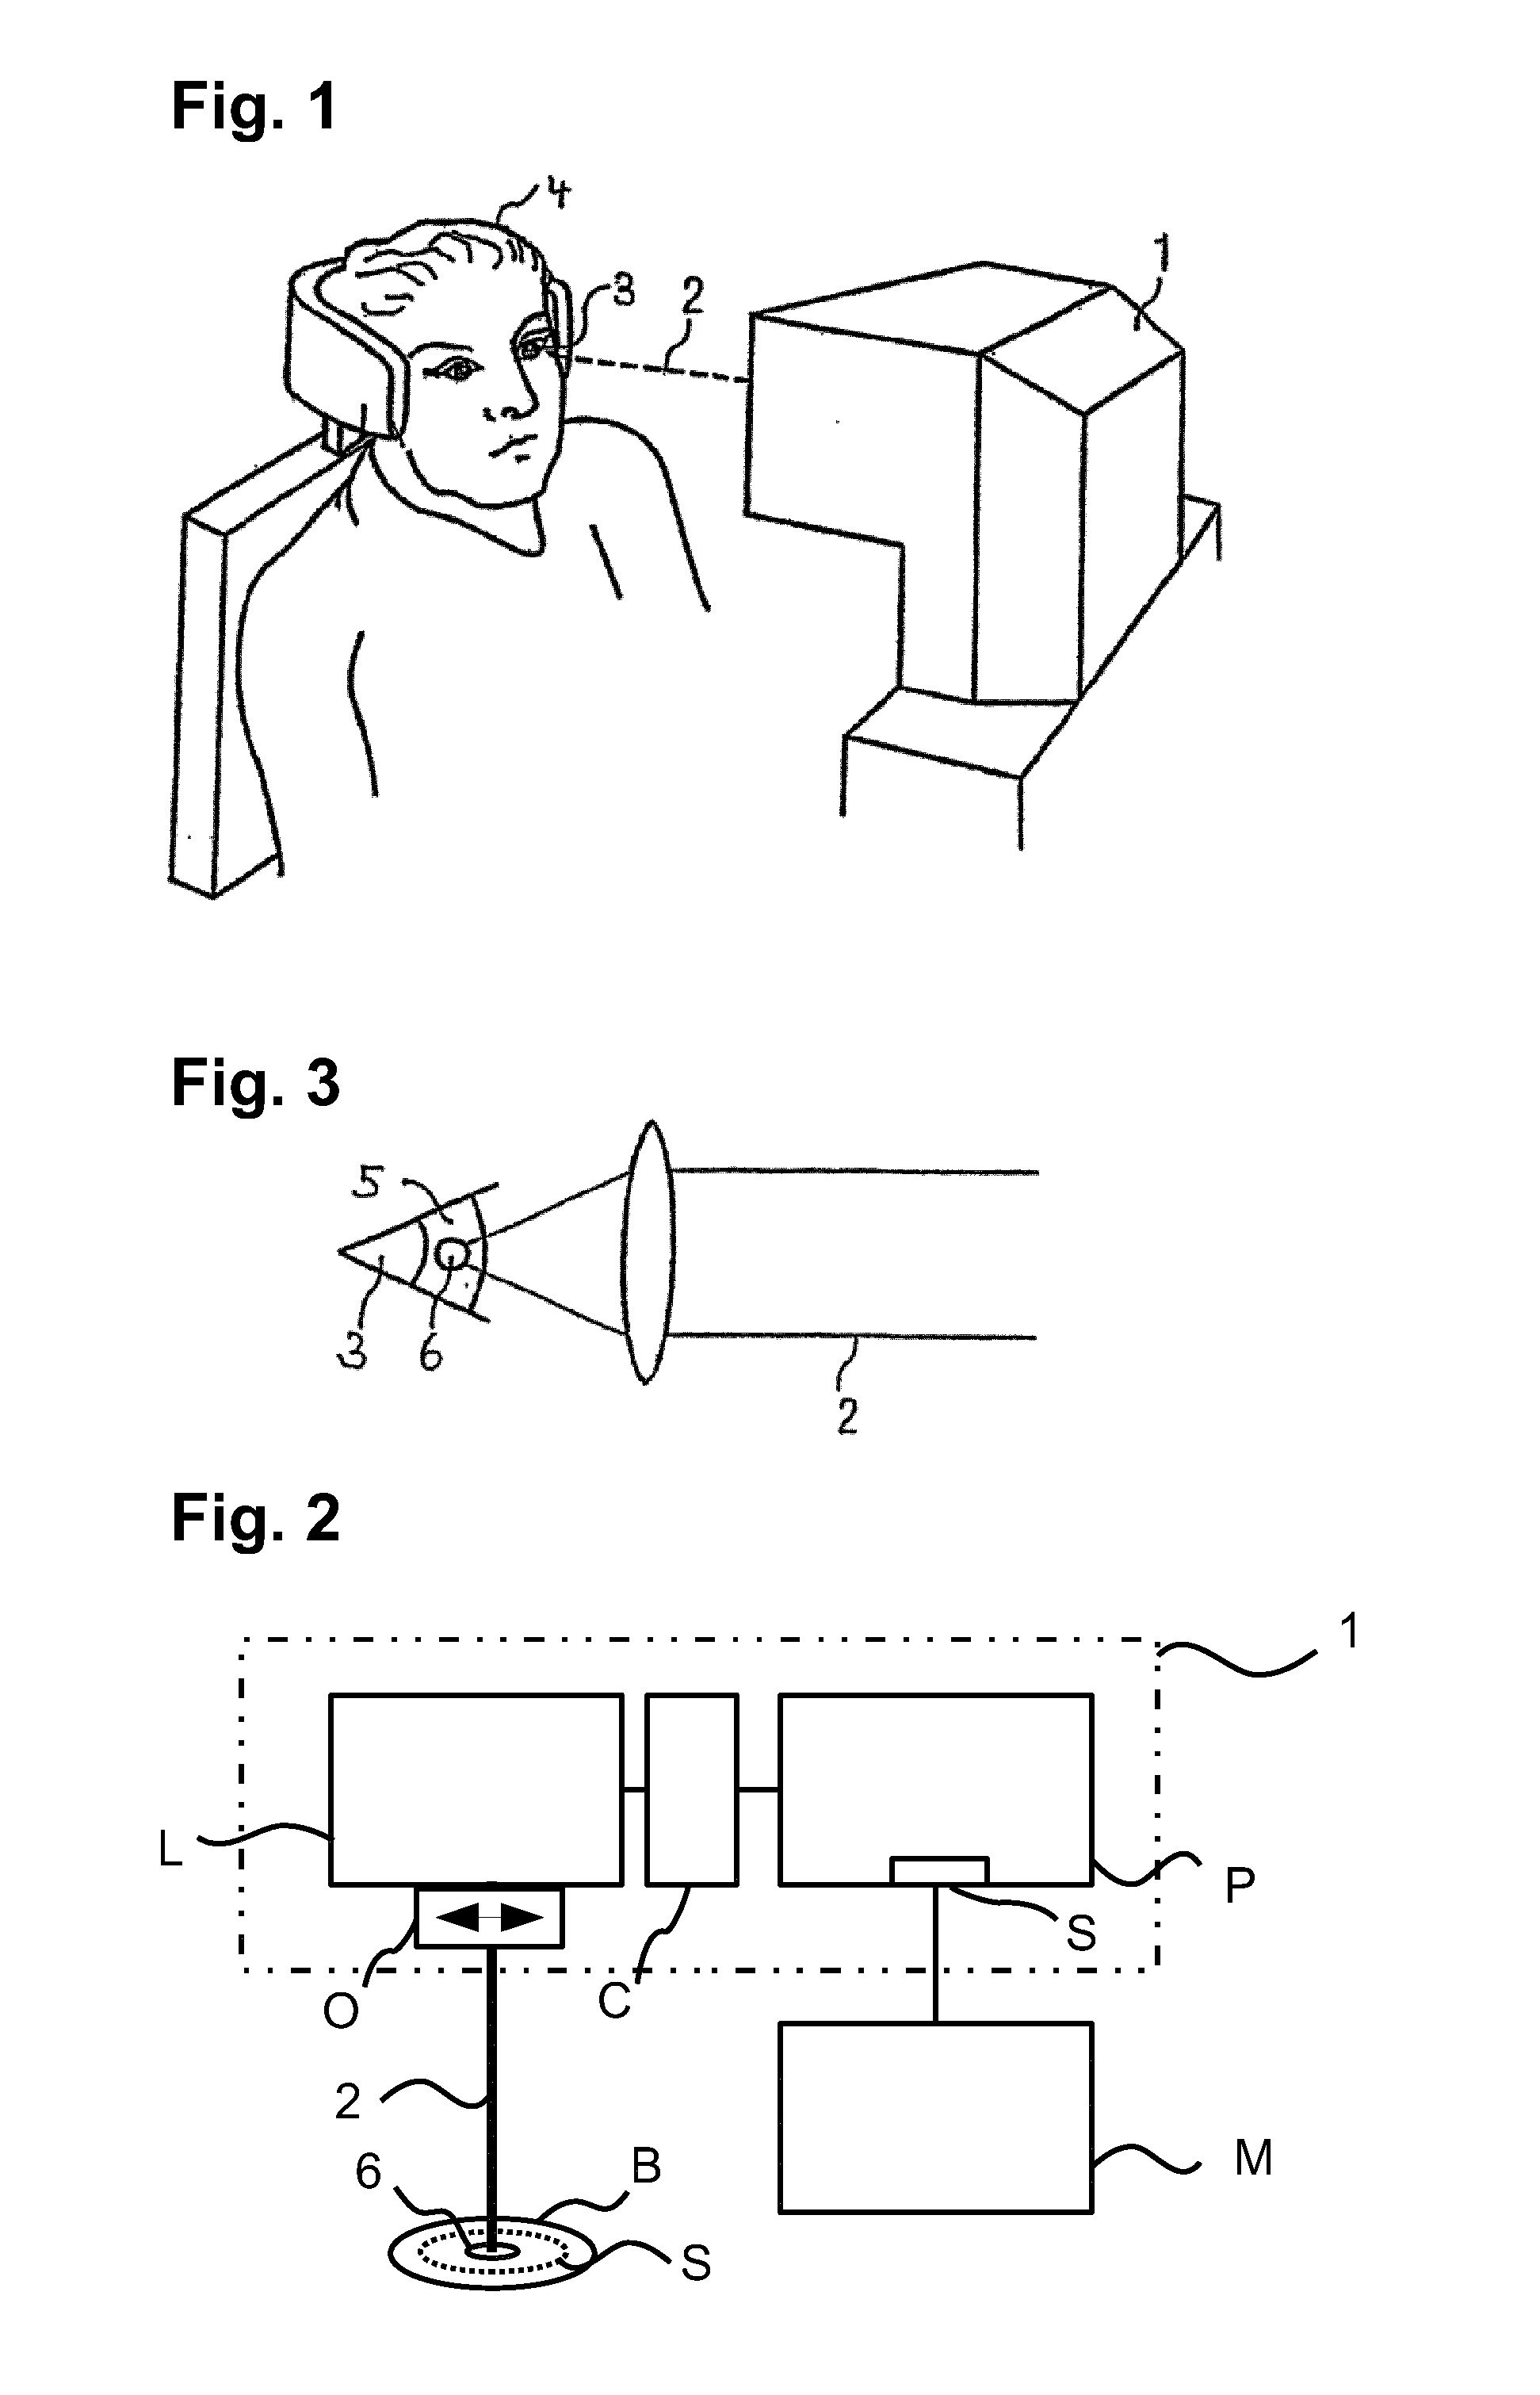 Producing cut surfaces in a transparent material by means of optical radiation